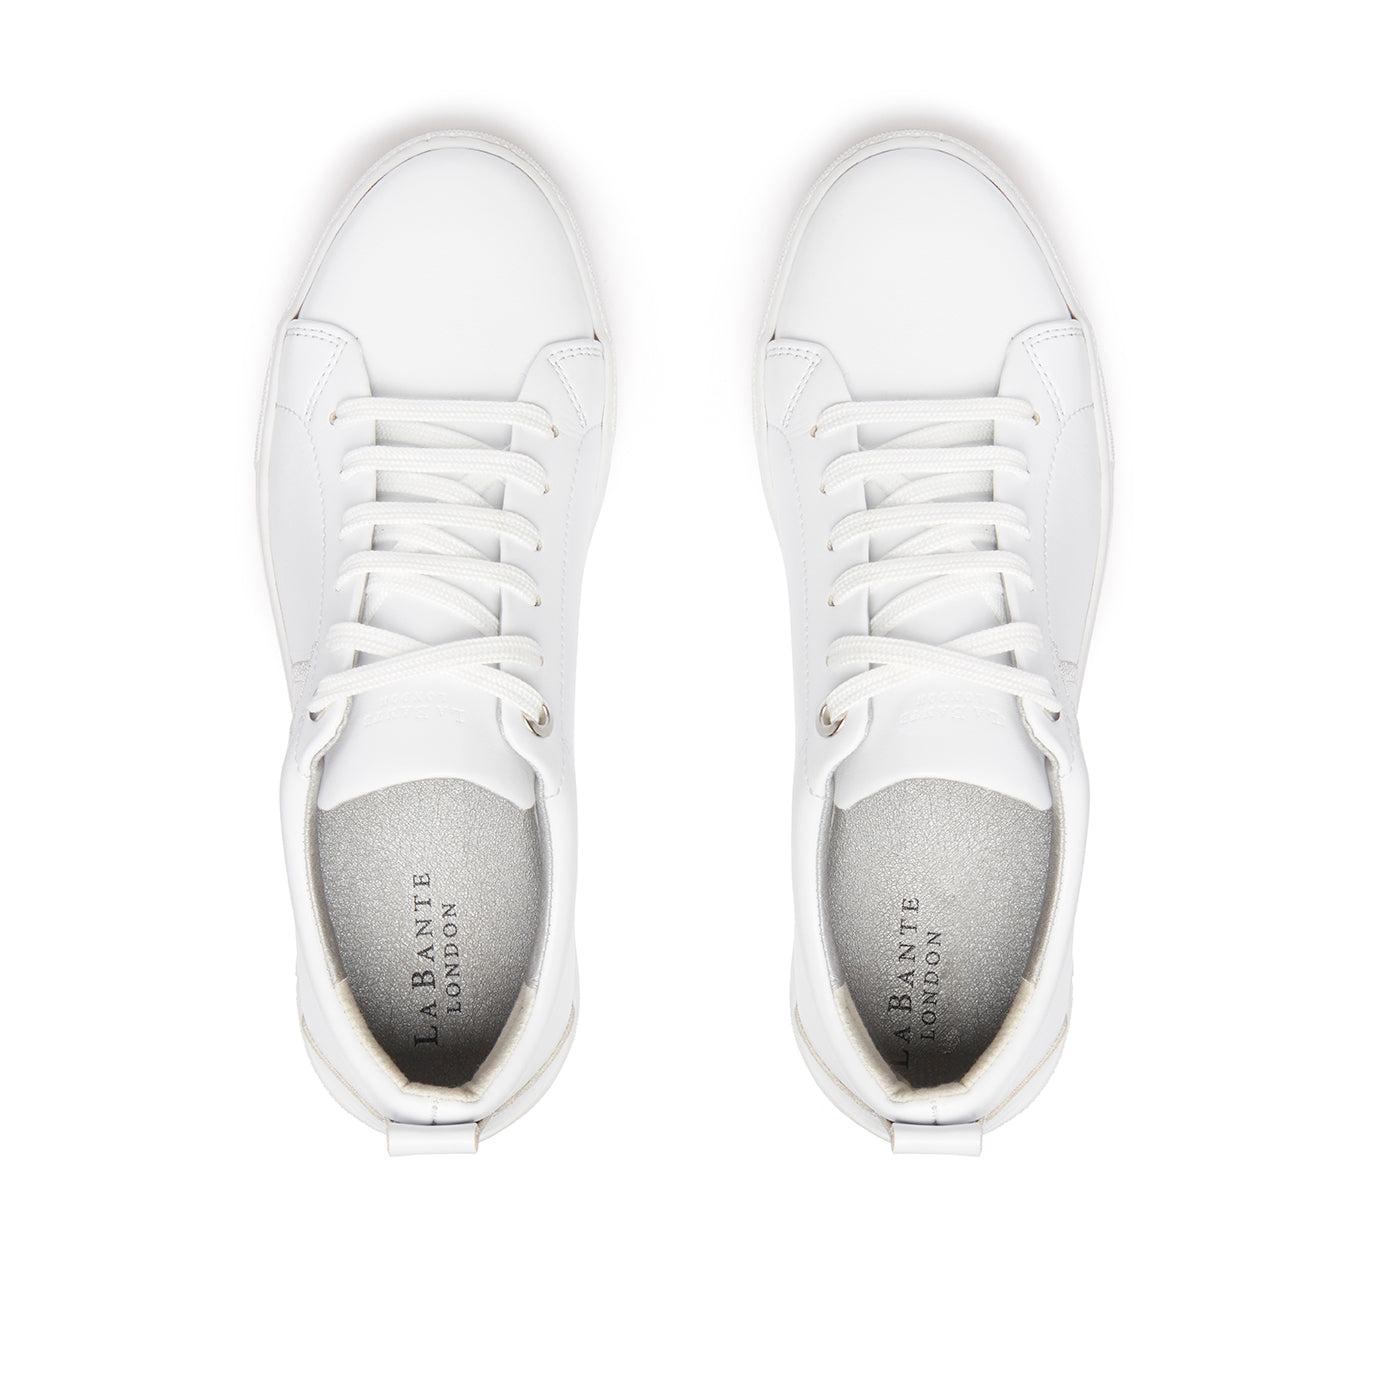 LB White Apple Leather Sneakers Women - Scarvesnthangs